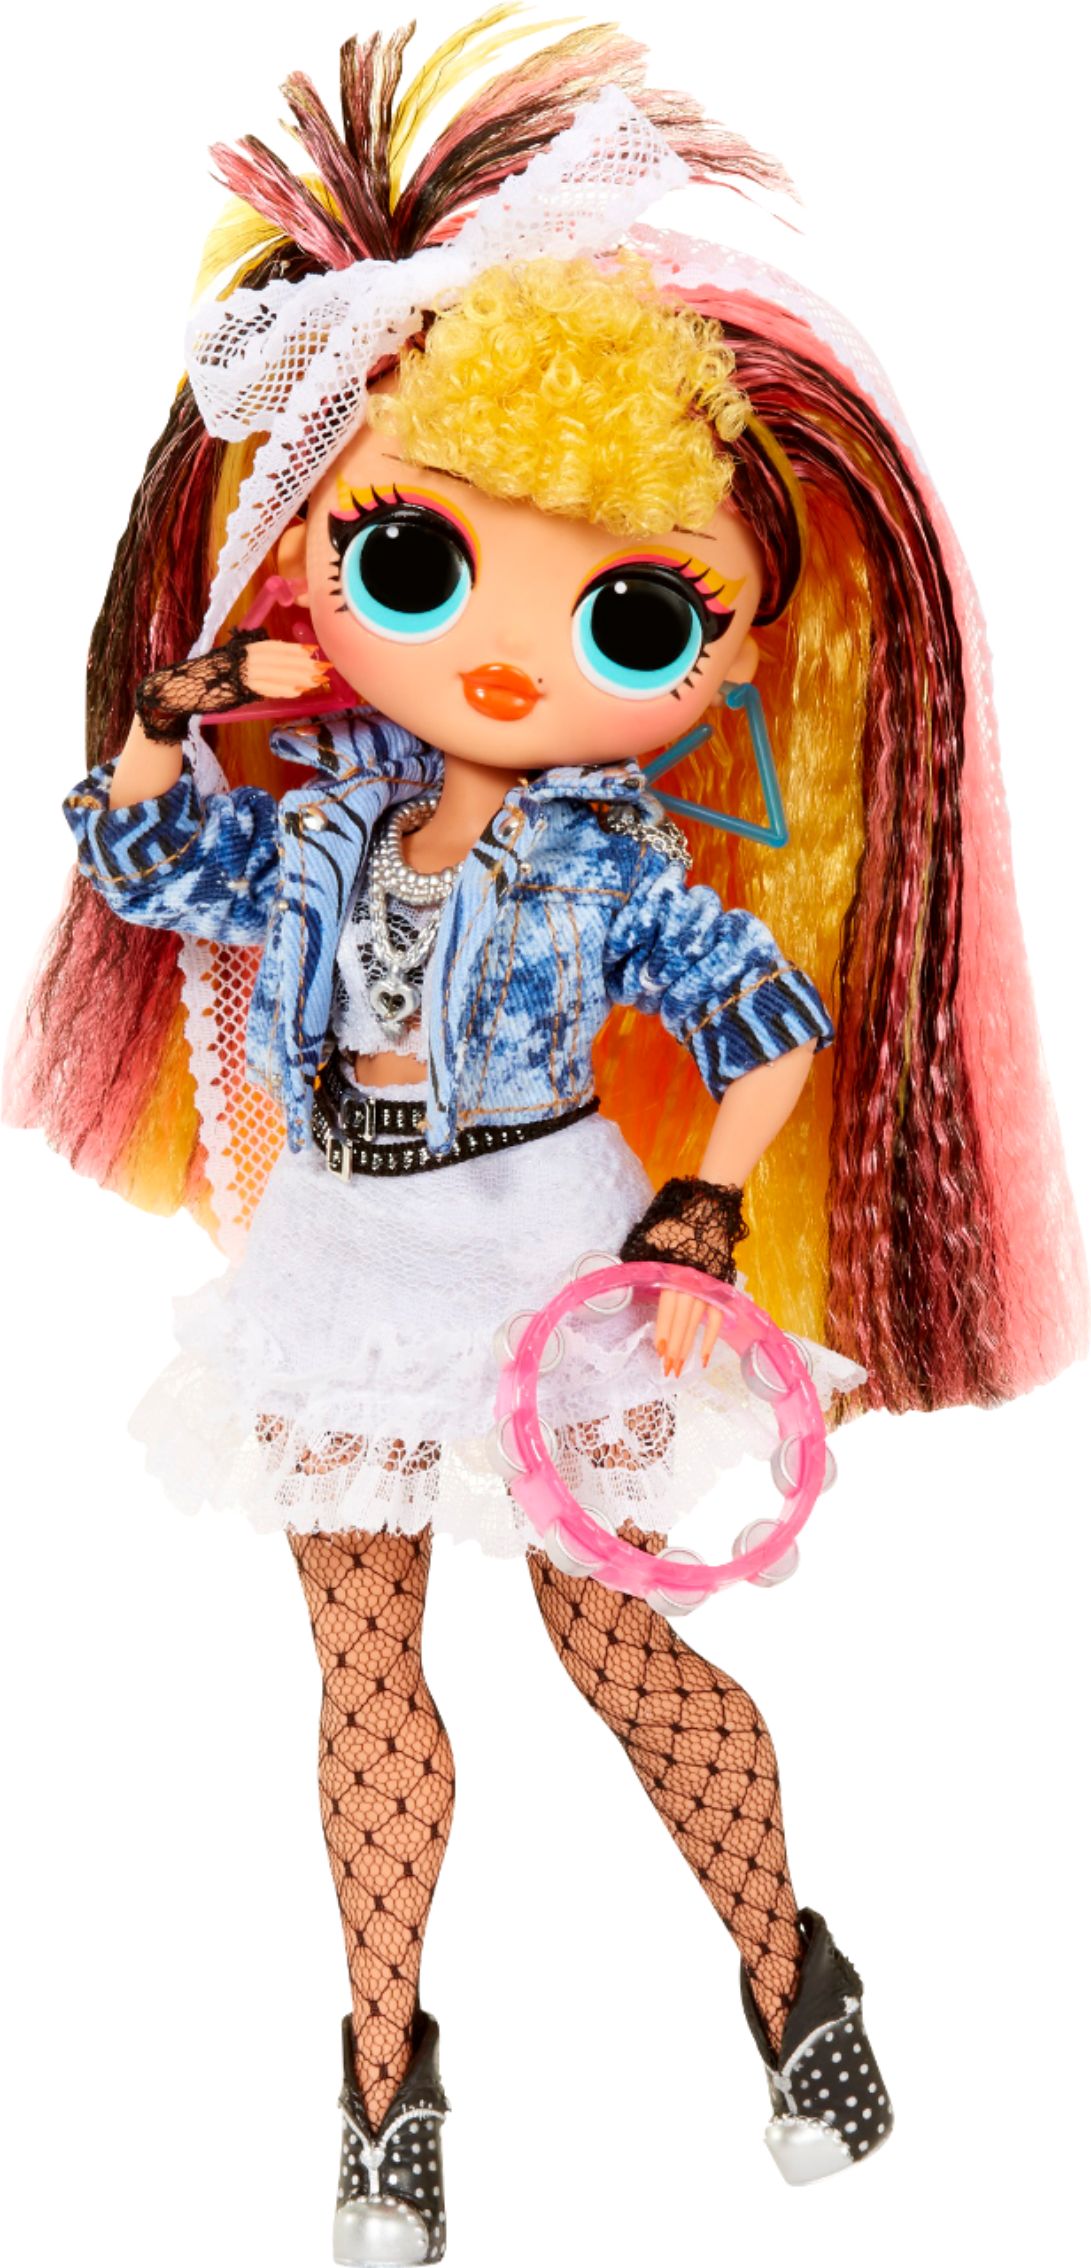 With 25 Surprises Collectable Fashion Doll LOL Surprise OMG Remix Pop BB 